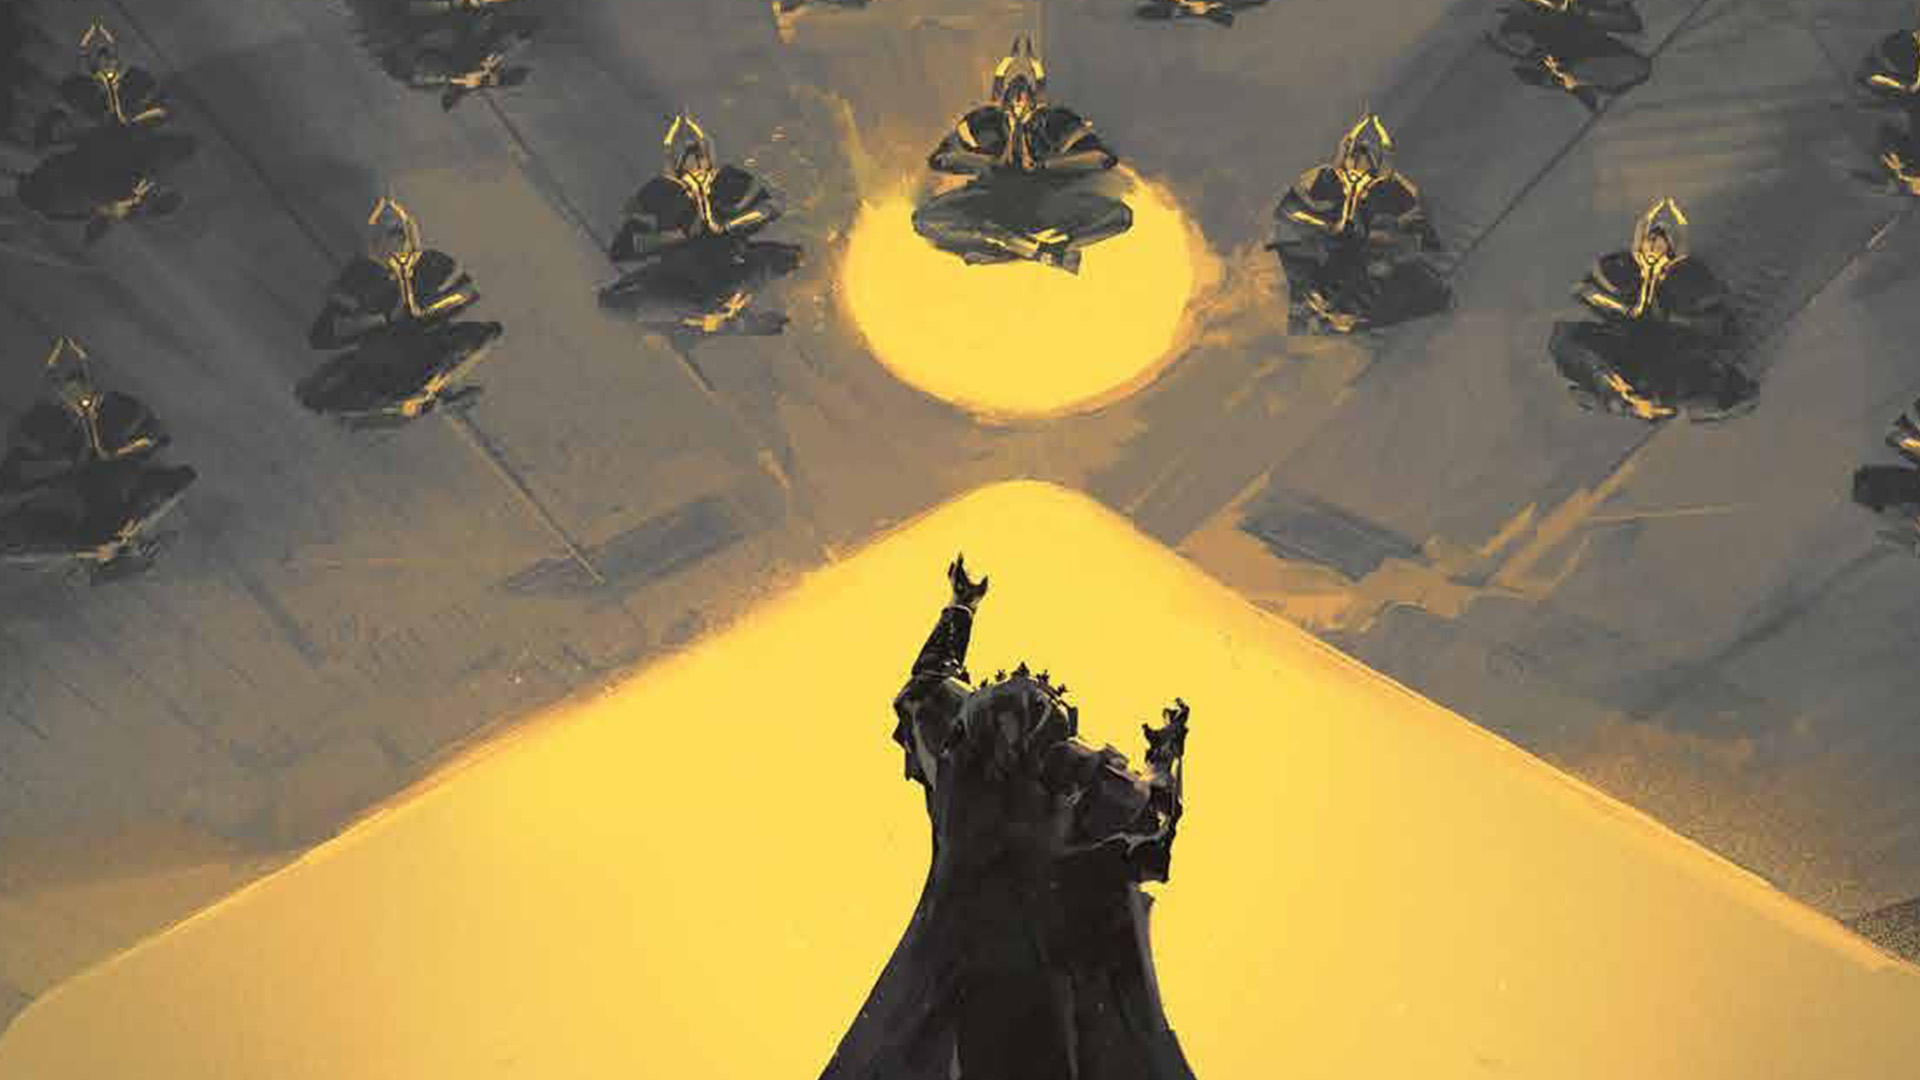 Destiny lore enthusiasts invited to weigh in on forthcoming books